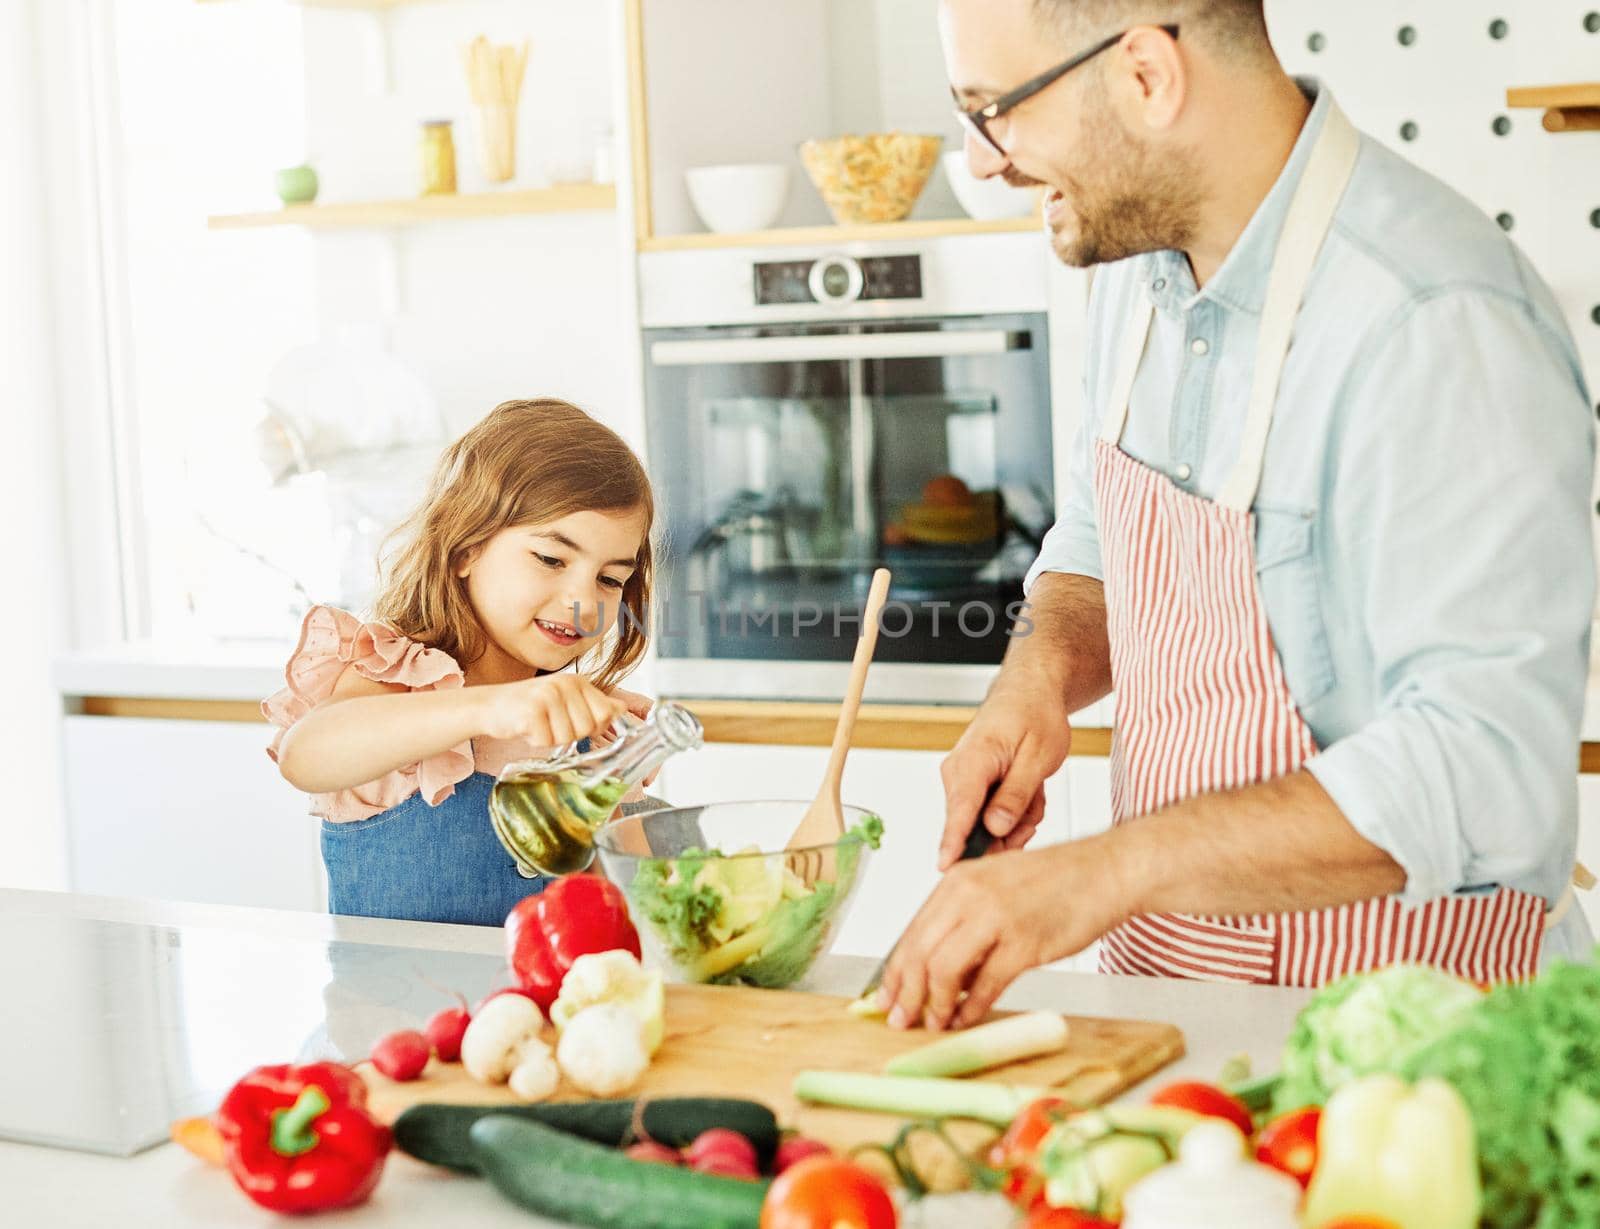 daughter father kitchen food preparing cooking child bonding happy girl together home parent by Picsfive